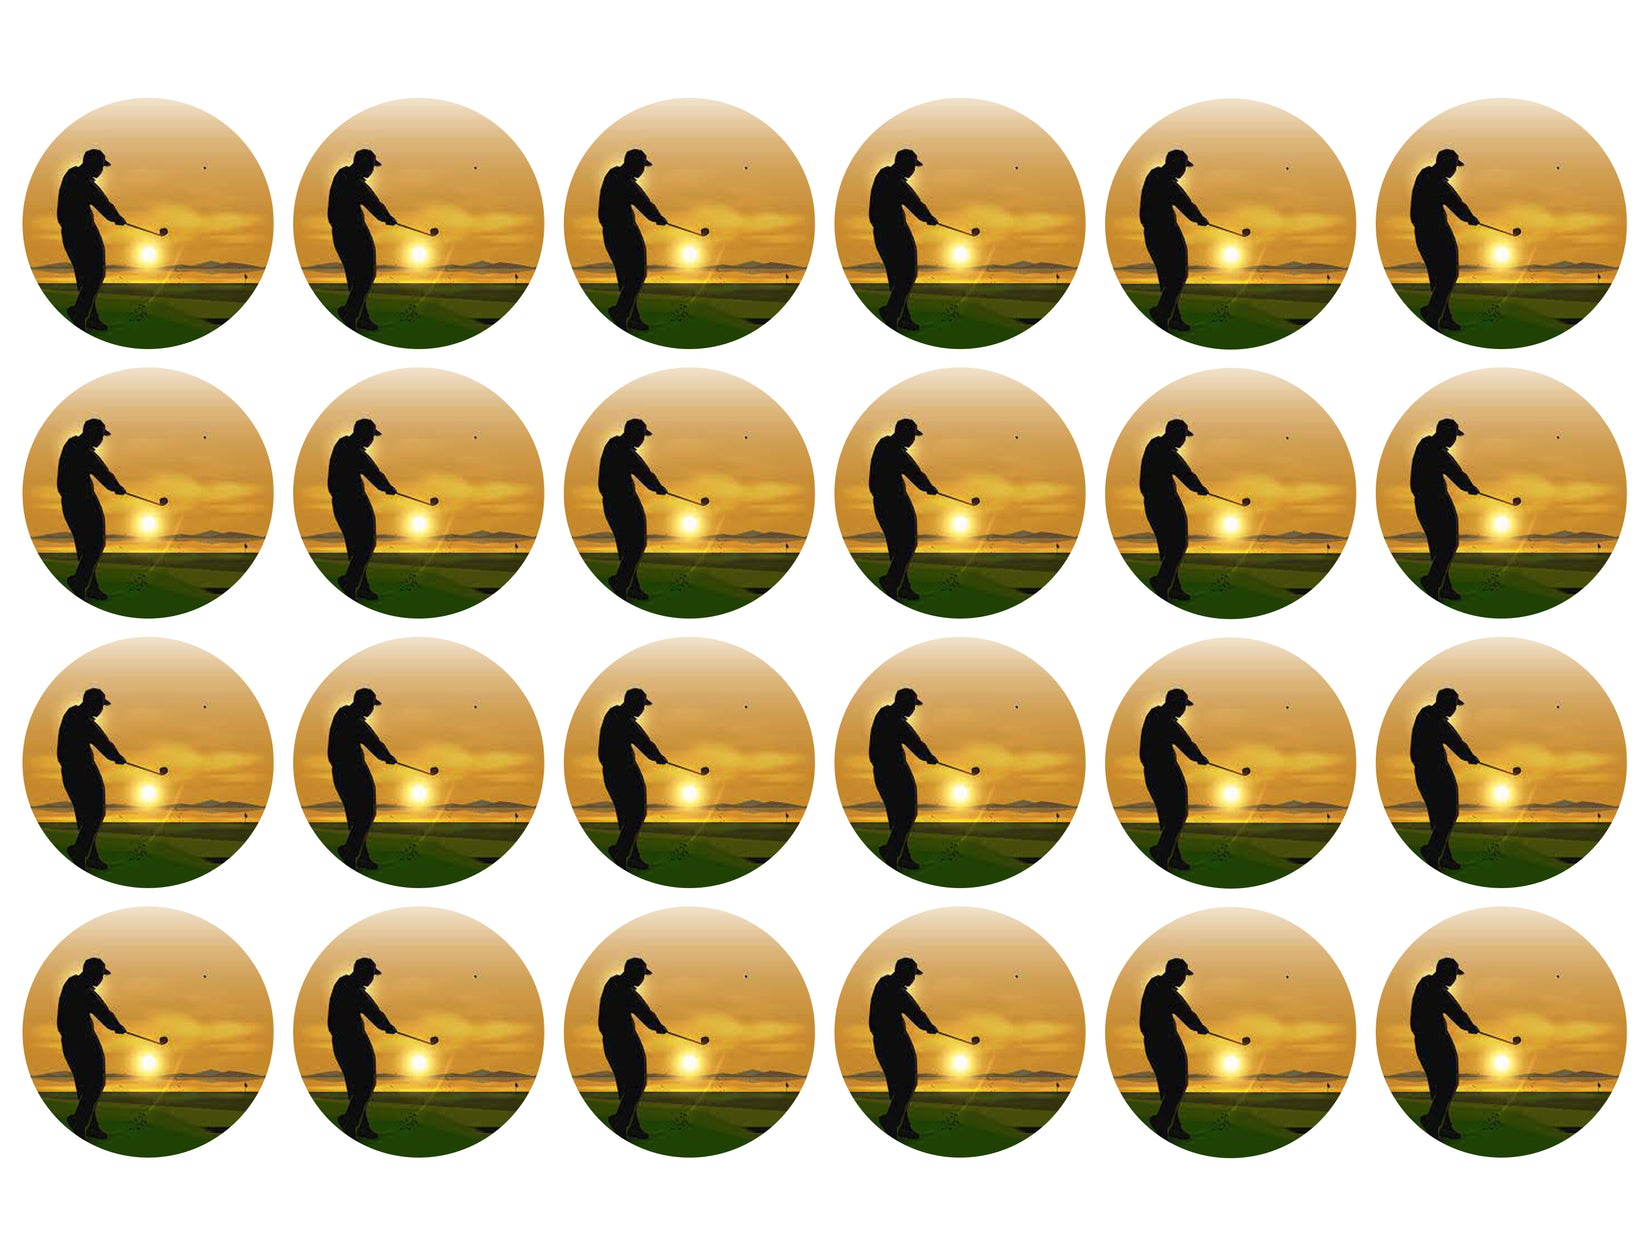 Golfing Silhouette at Sunset Edible Cupcake Topper Images ABPID56015